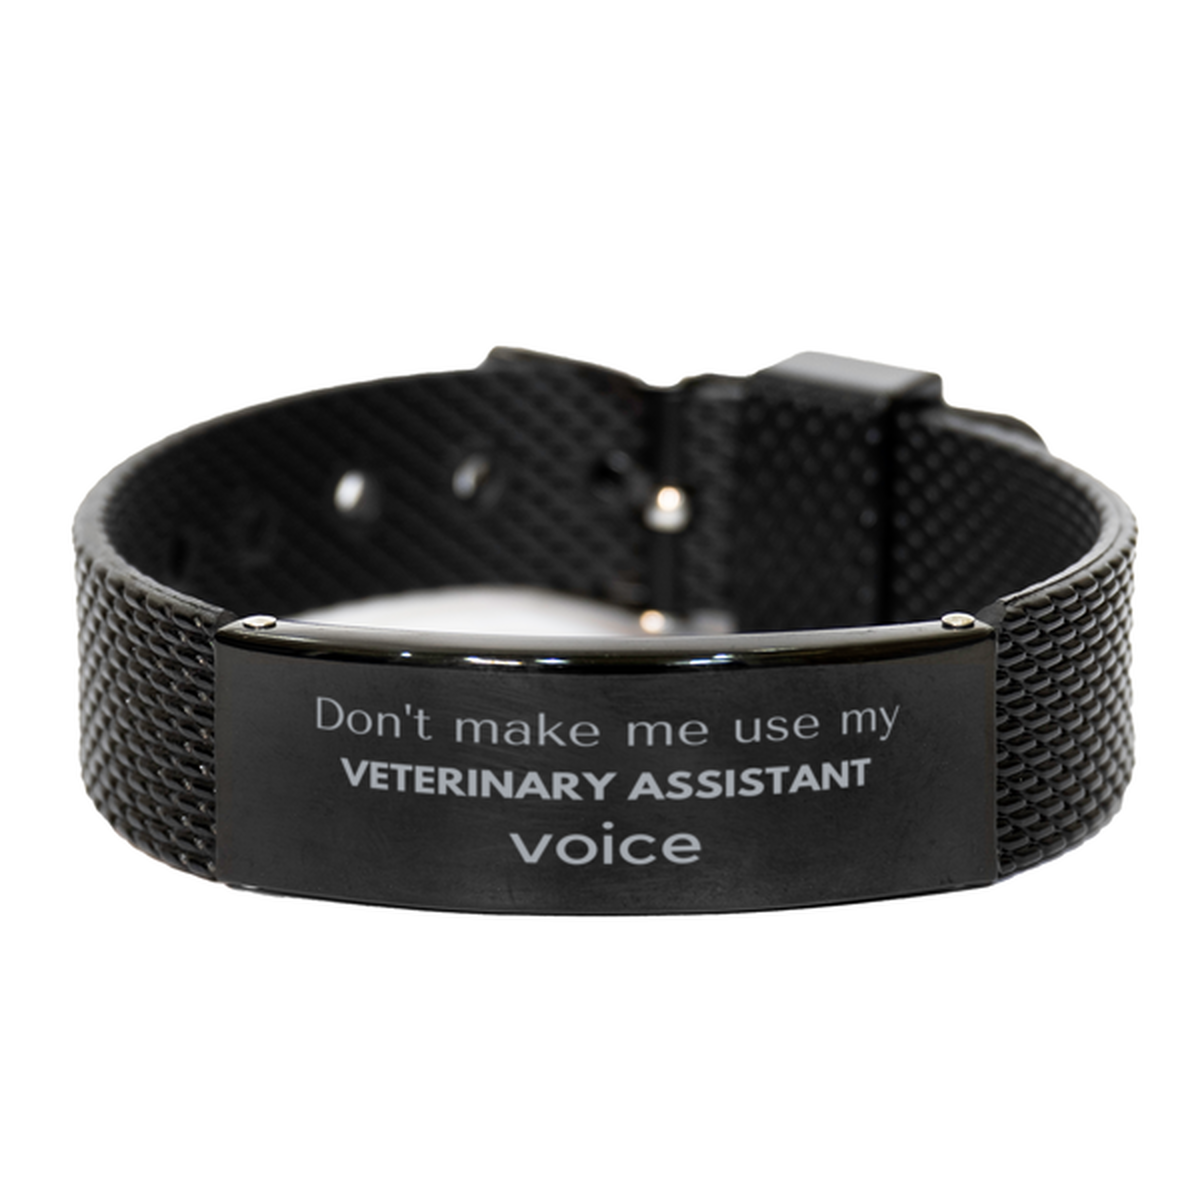 Don't make me use my Veterinary Assistant voice, Sarcasm Veterinary Assistant Gifts, Christmas Veterinary Assistant Black Shark Mesh Bracelet Birthday Unique Gifts For Veterinary Assistant Coworkers, Men, Women, Colleague, Friends